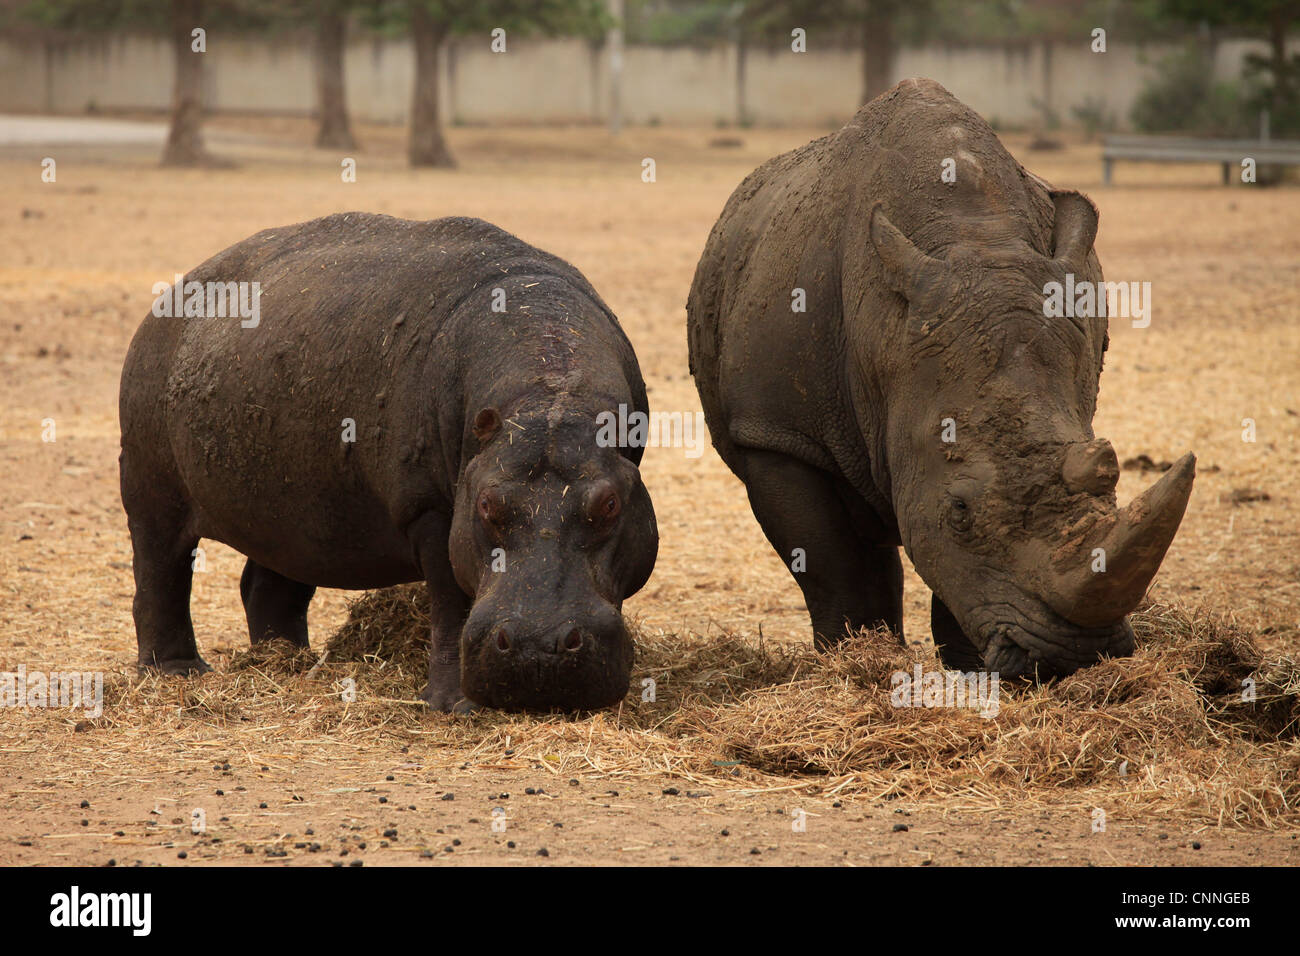 http://c8.alamy.com/comp/CNNGEB/a-rhino-and-a-hippo-eating-together-at-the-open-african-park-of-ramat-CNNGEB.jpg